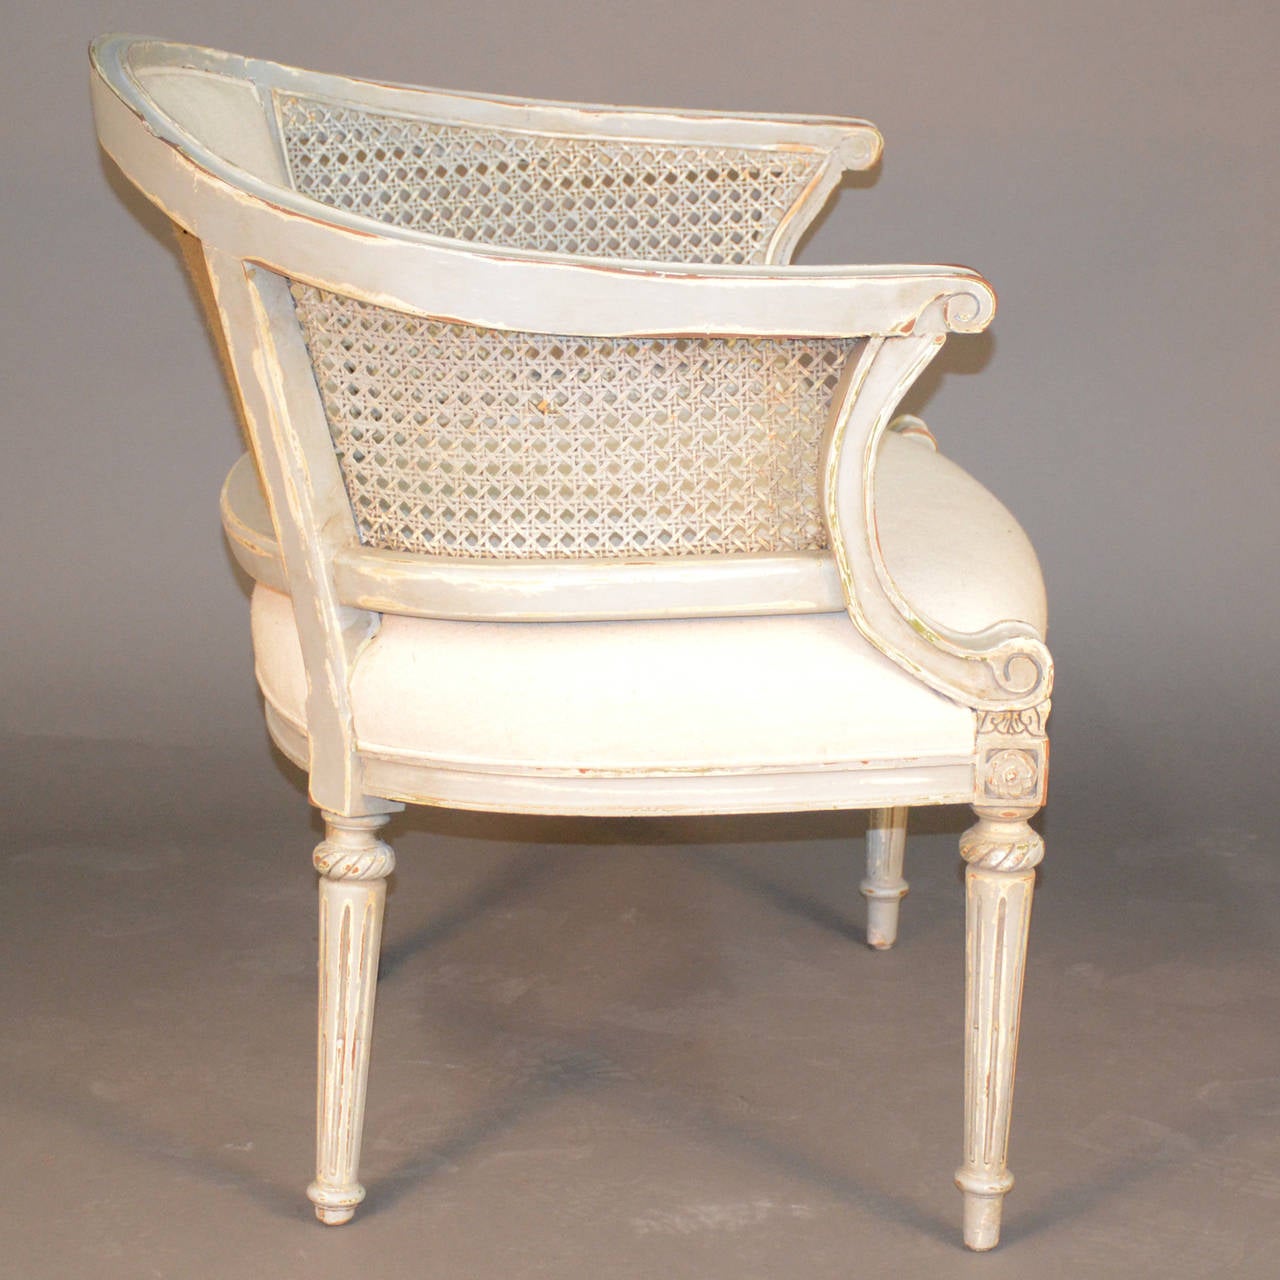 Pair of Louis XVI Style Caned Chairs In Good Condition For Sale In Bridport, CT